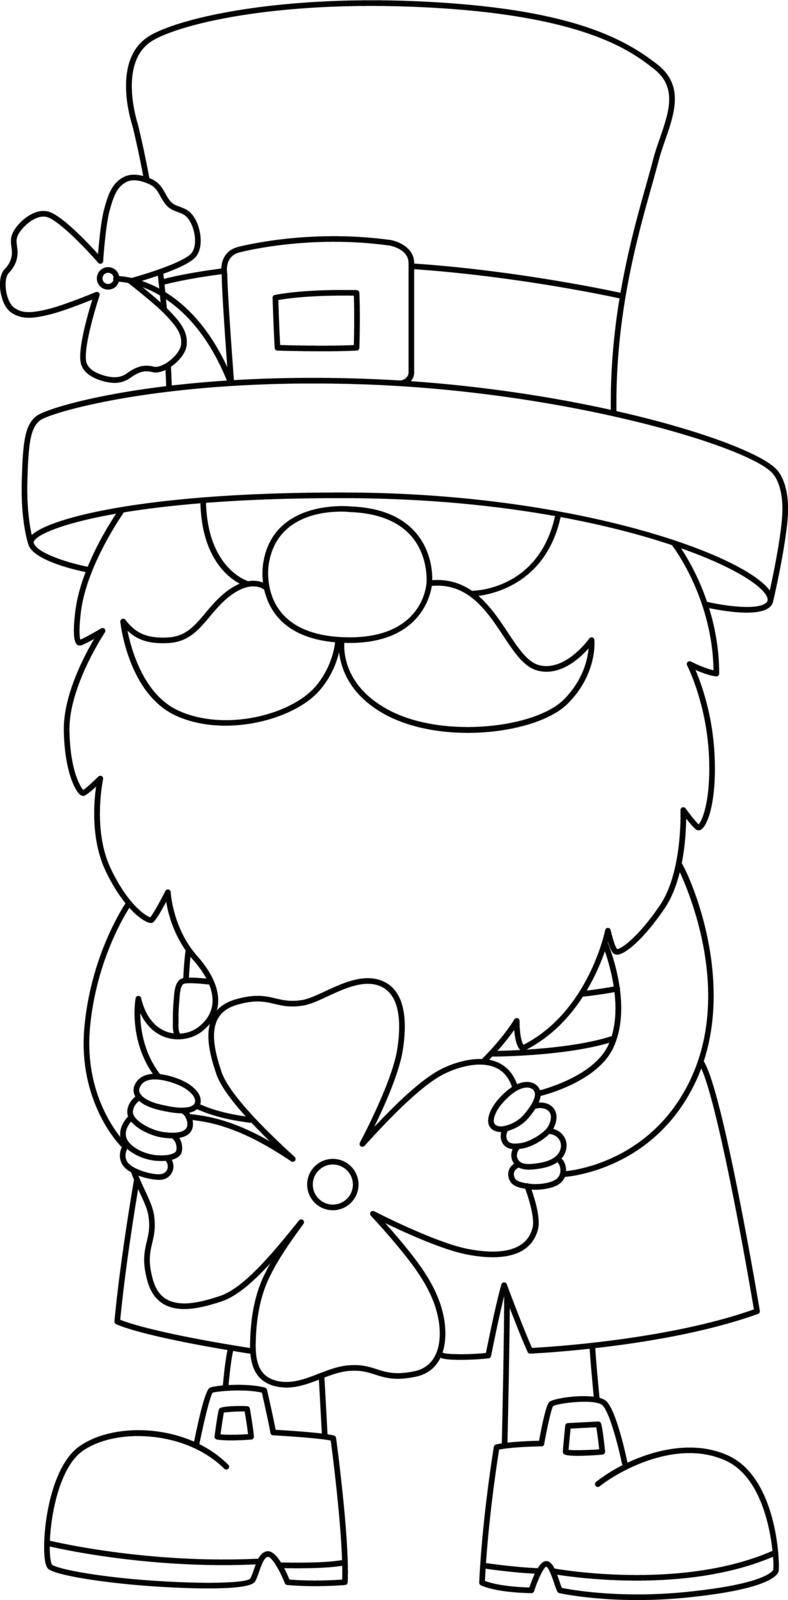 St. Patricks Day Gnome Coloring Page for Kids by abbydesign